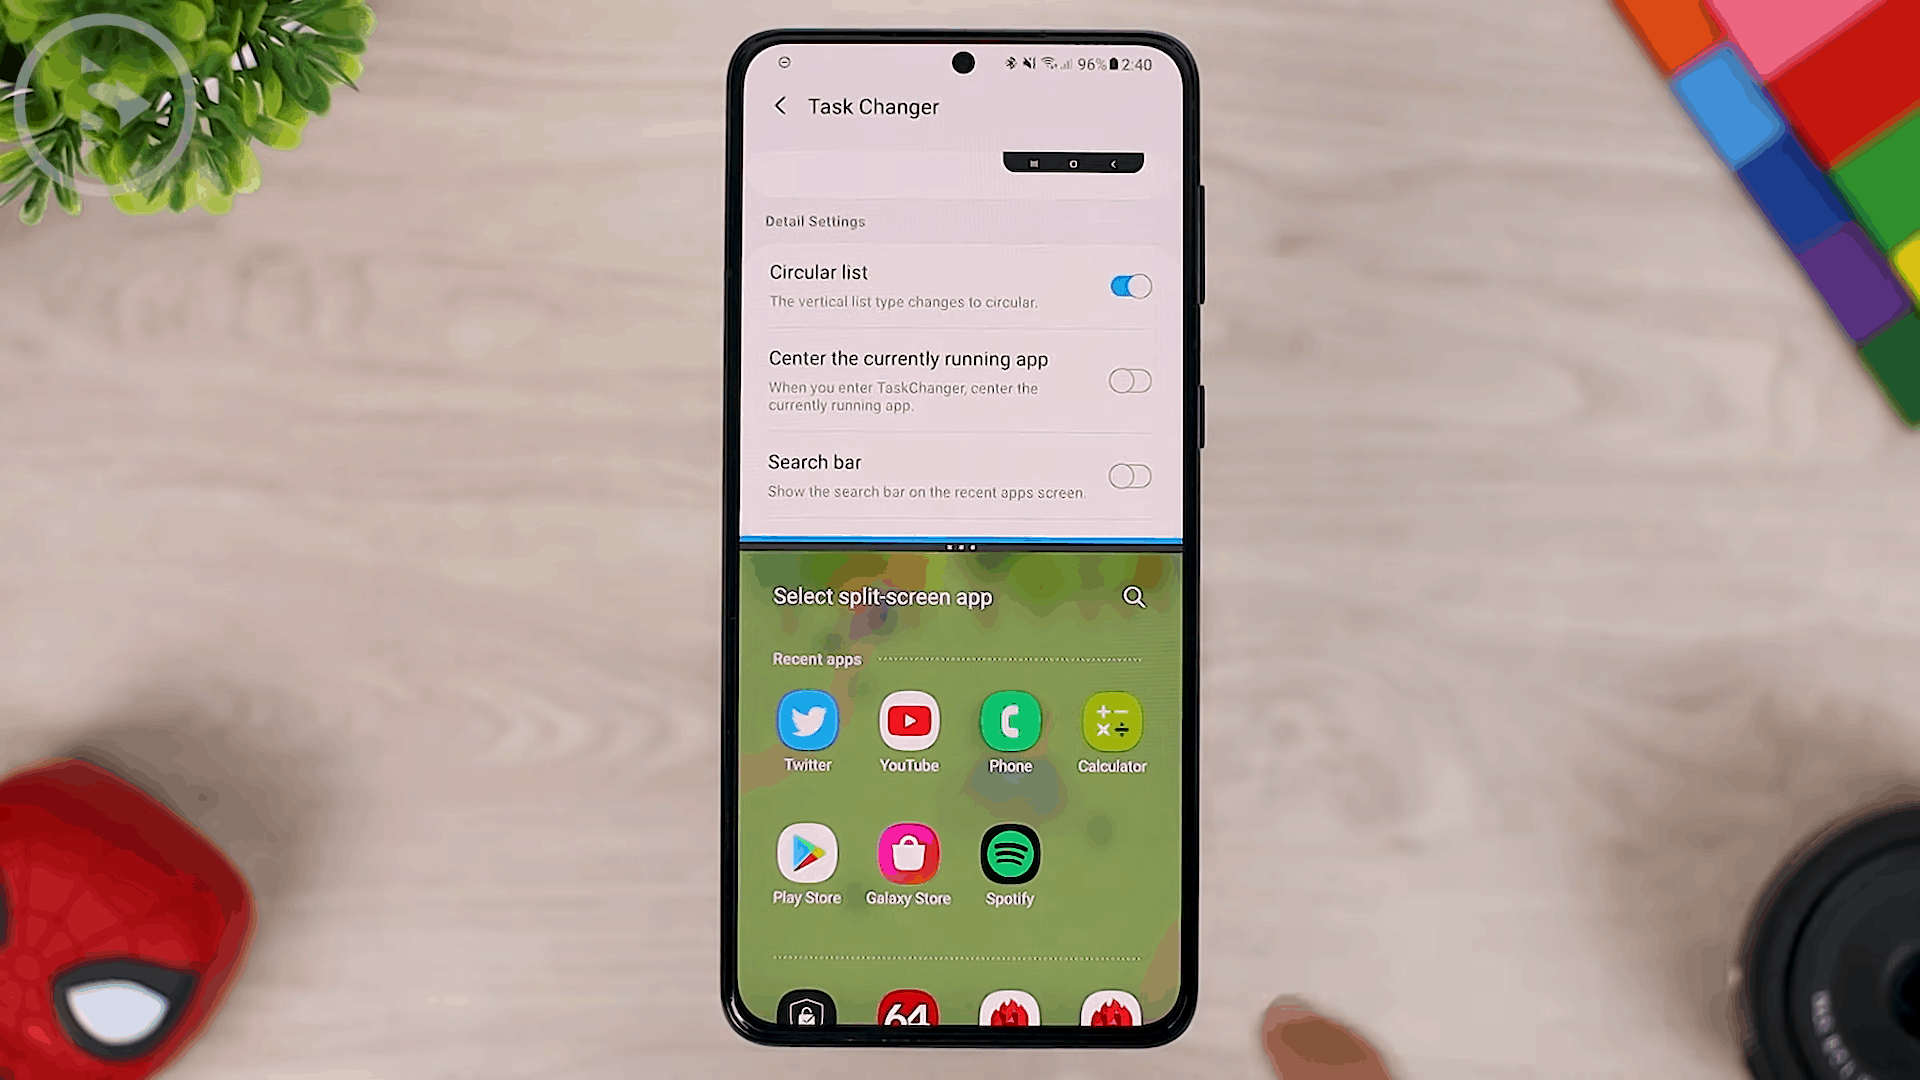 Shortcut to Open App on Split Screen View - 8 COOL Features in the LATEST Good Lock Update April 2021